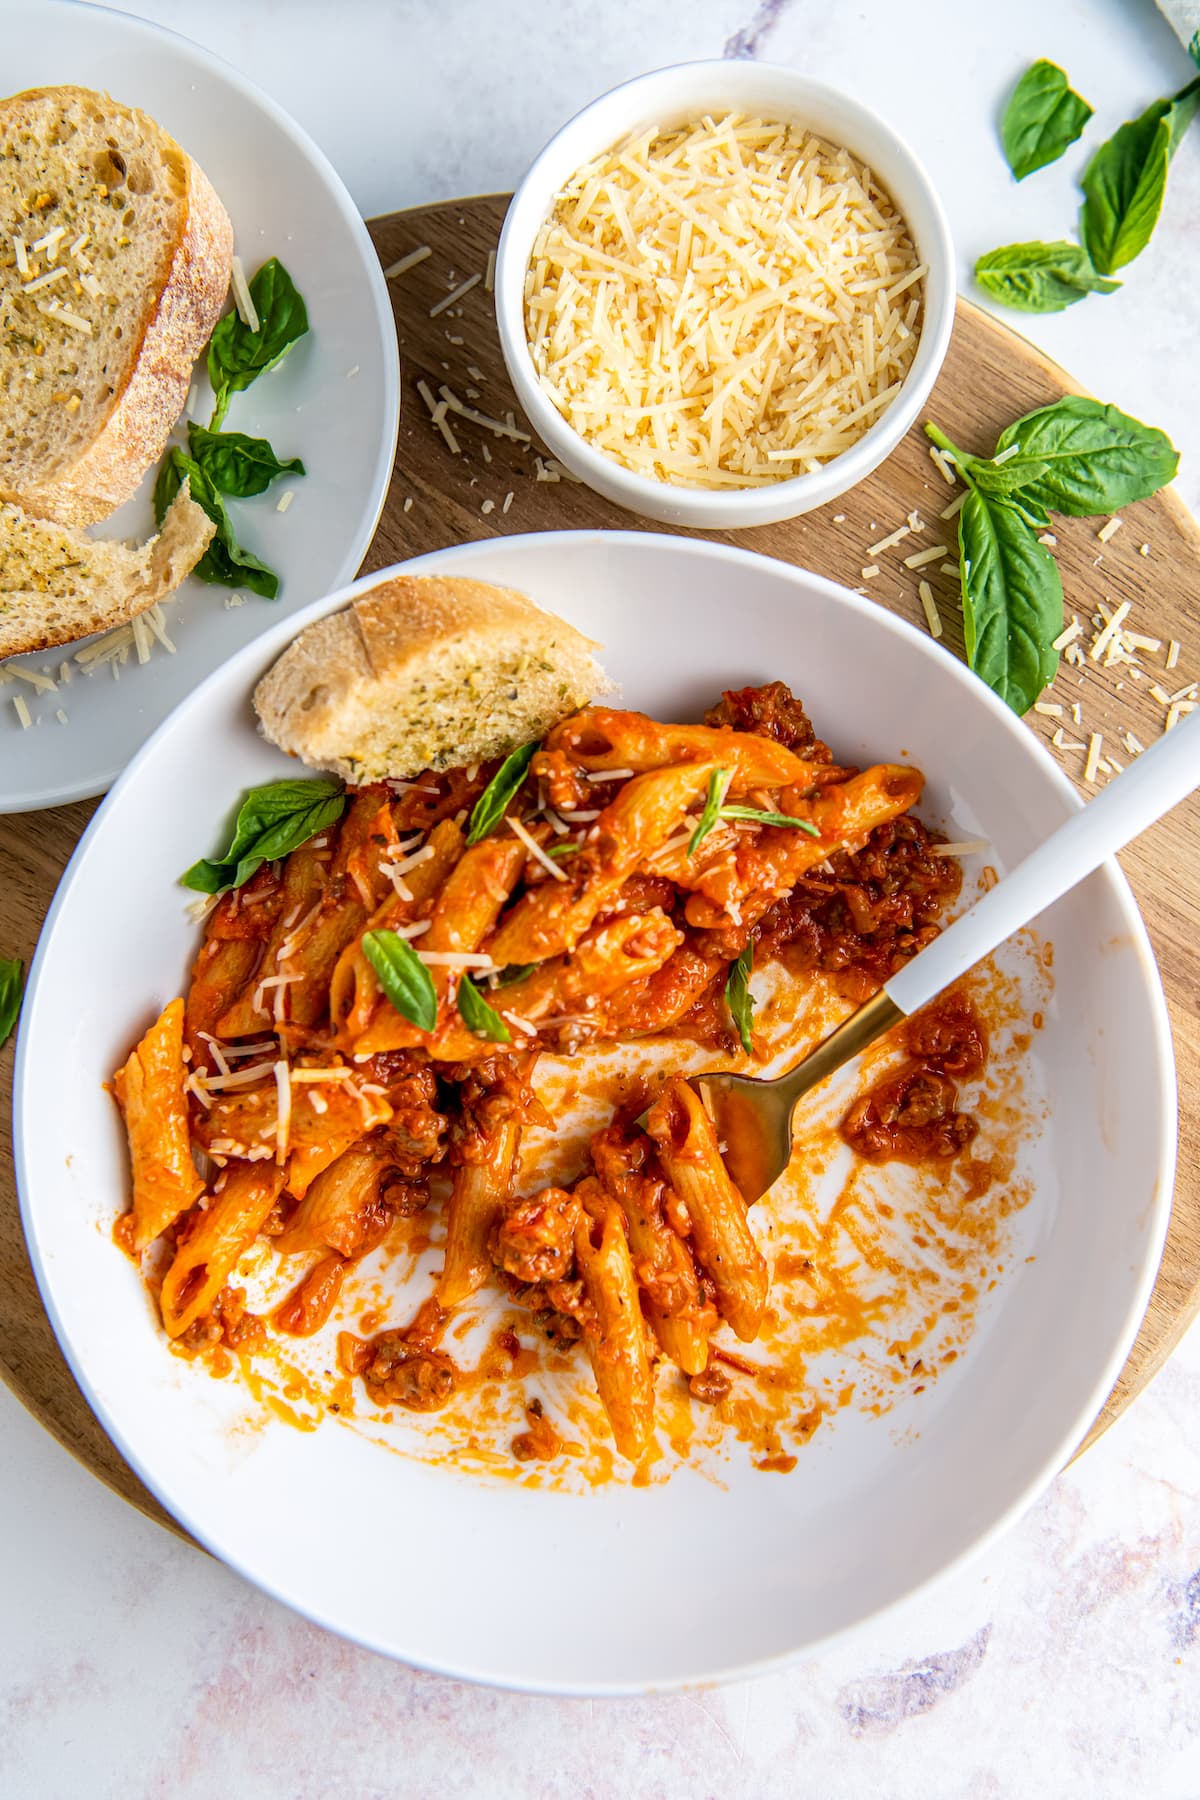 A bowl of One Pot Italian Sausage Pasta with cheese and bread is served.